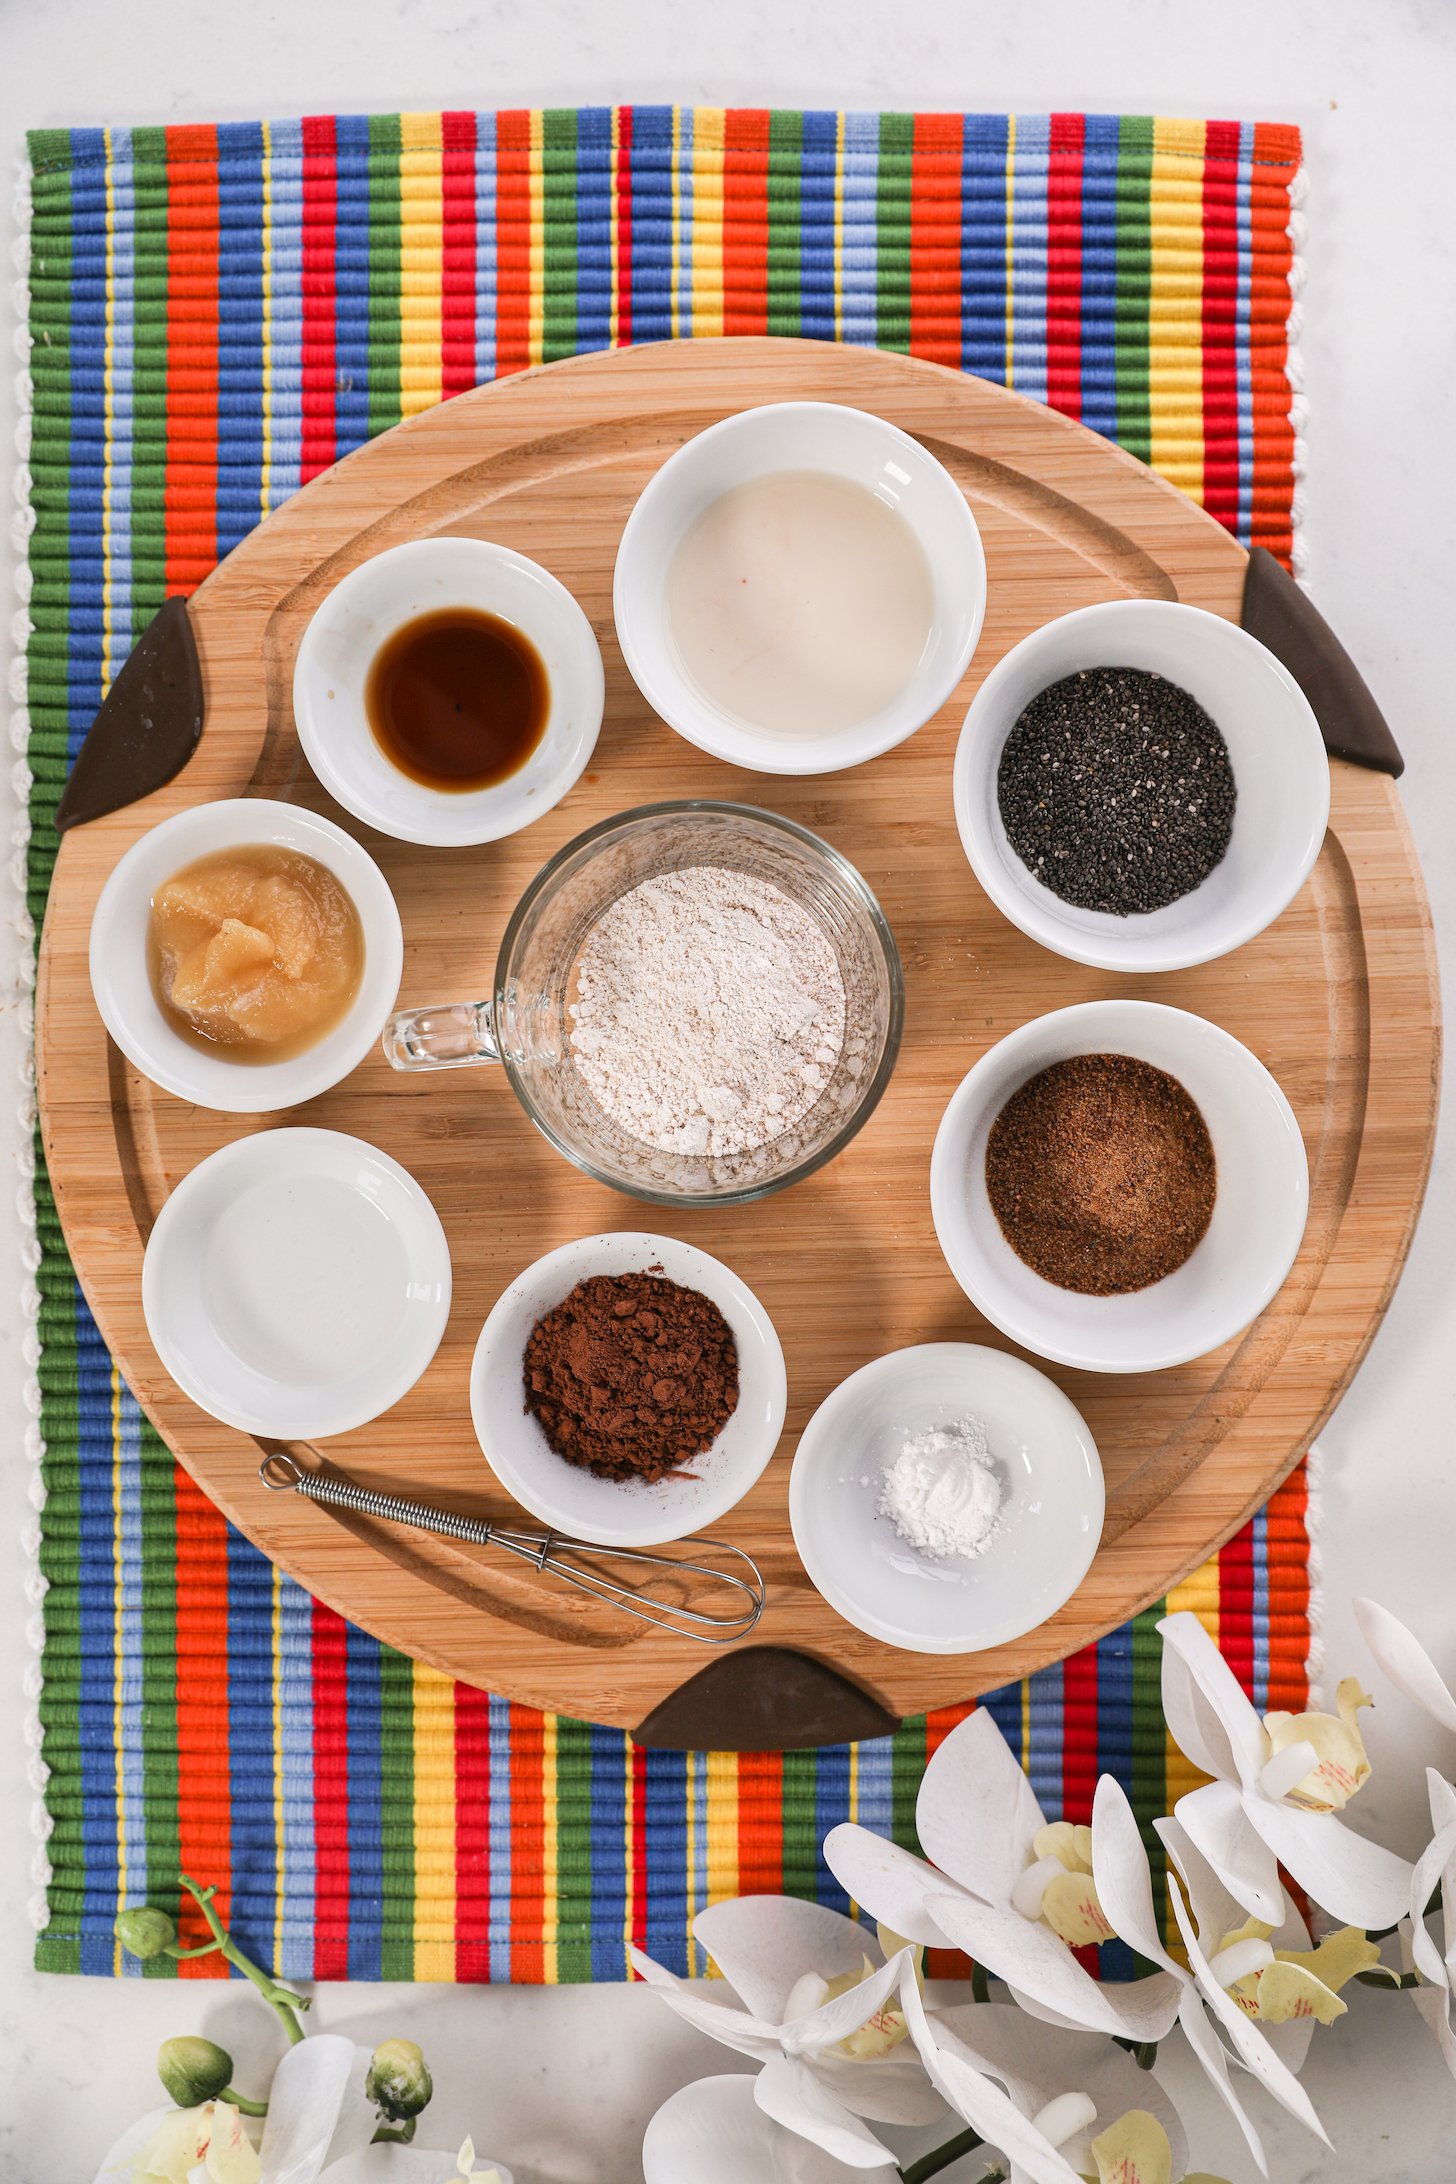 A collection of food ingredients like flour, milk, seeds, cacao displayed on a wooden board.